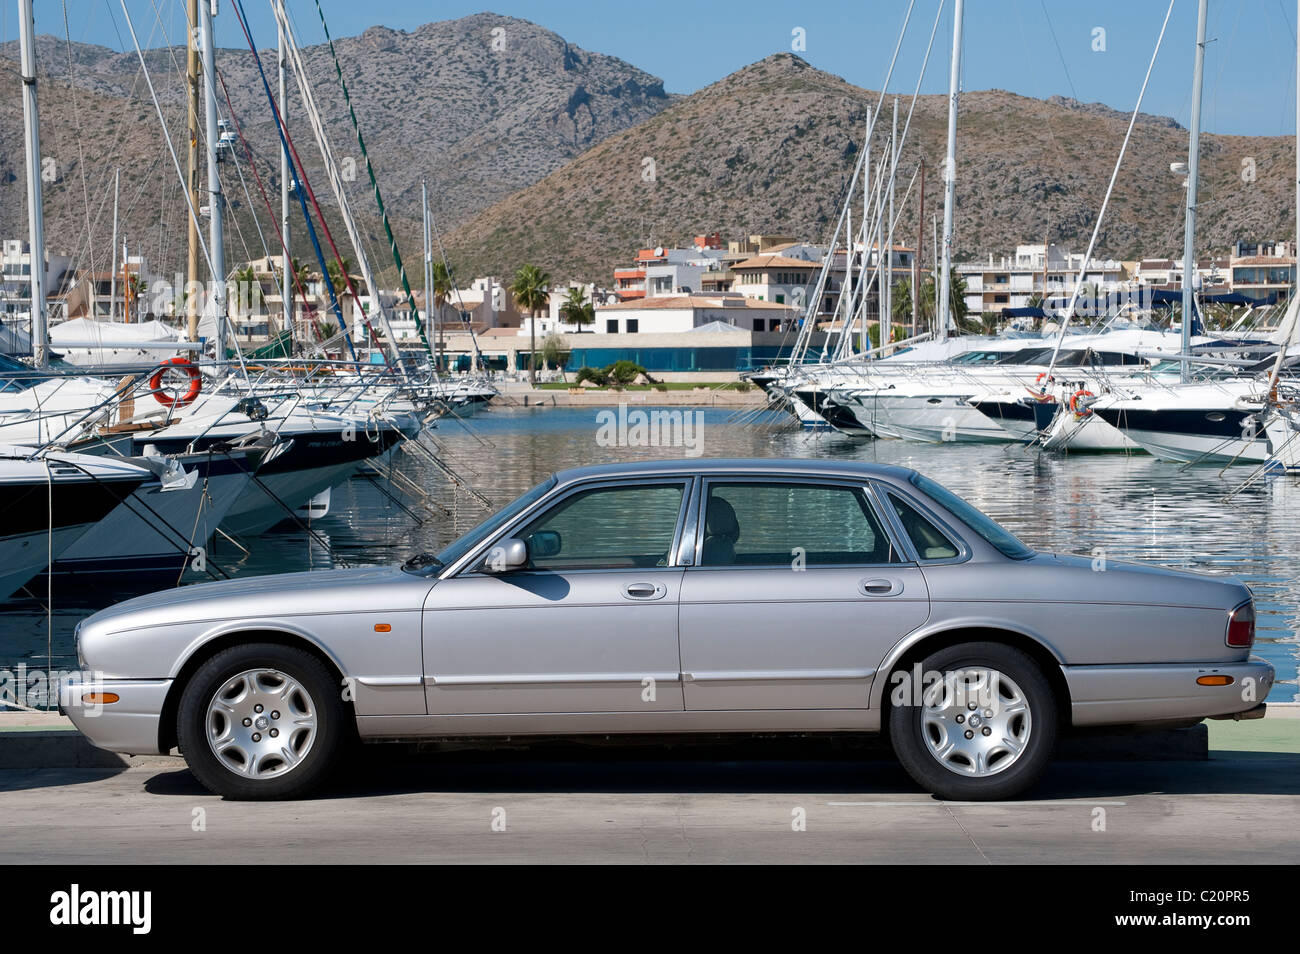 Side view of a Jaguar V8 XJ series car parked at a marina in Spain. Stock Photo